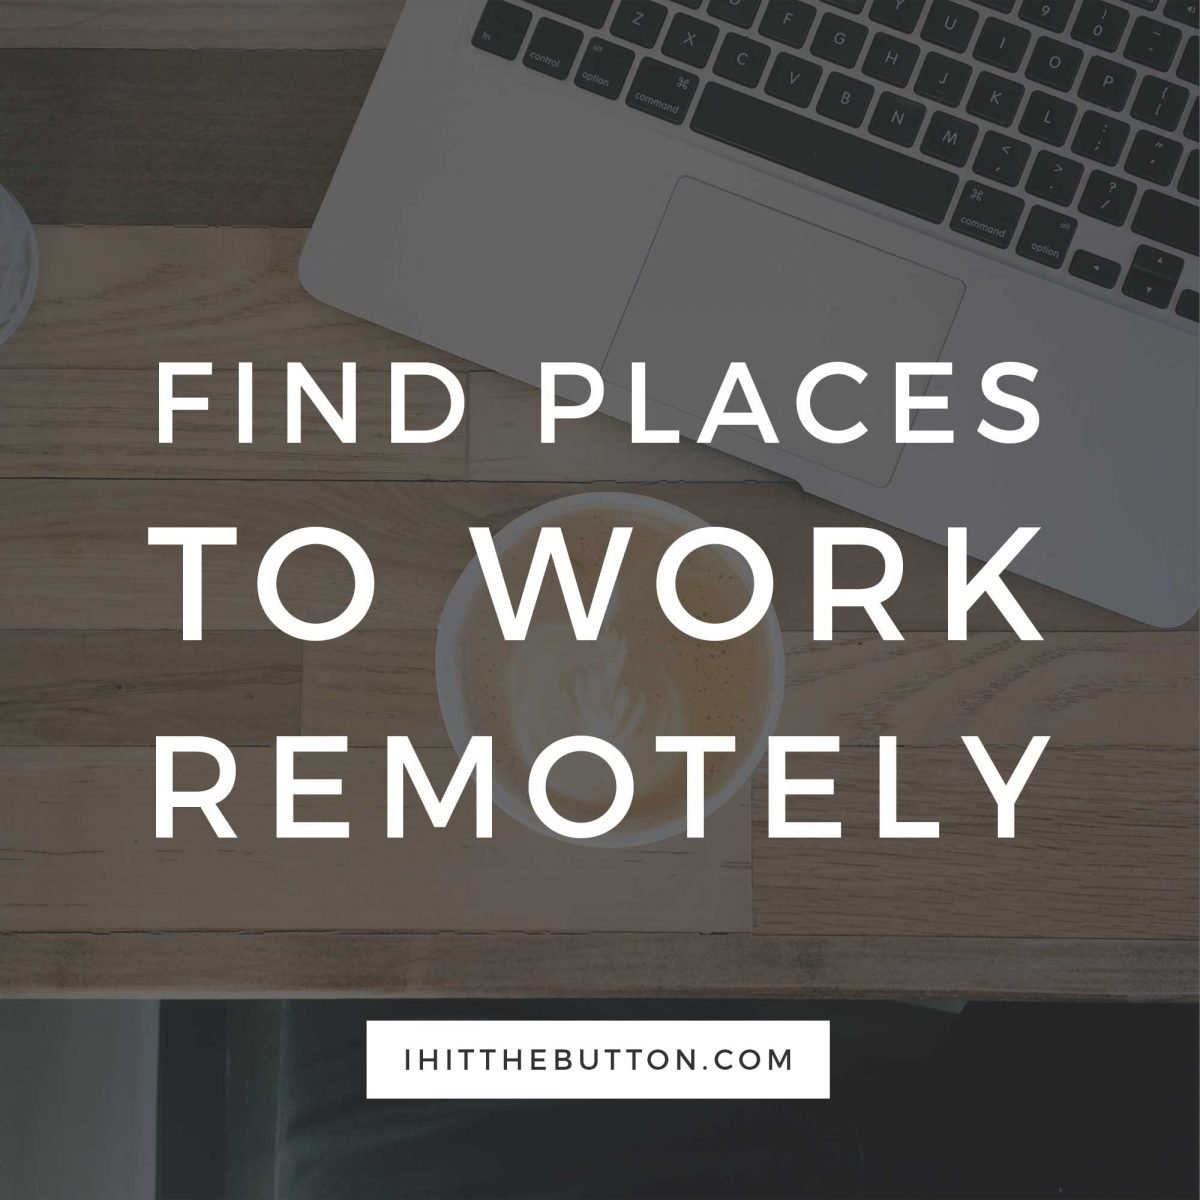 How to Find Places to Work Remotely (and Get Stuff Done)